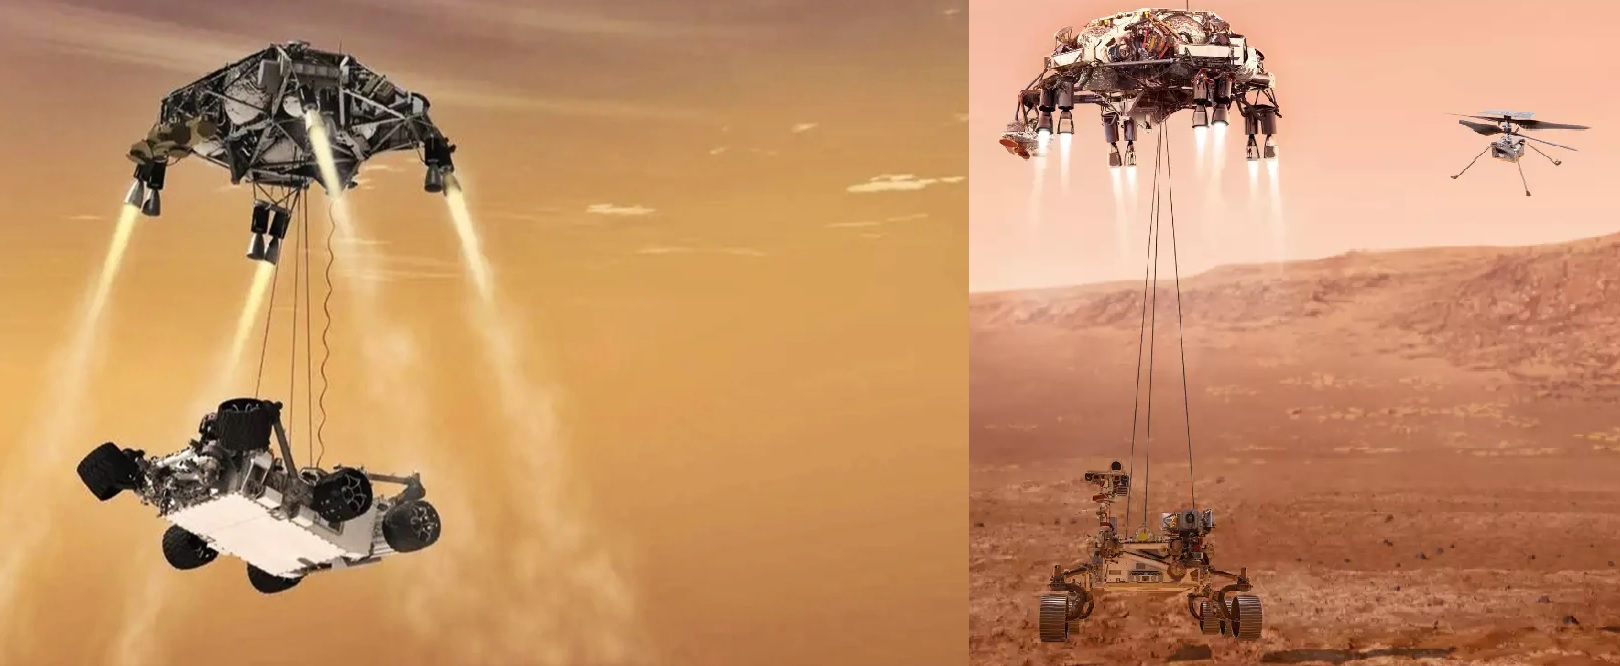 ISRO's Mangalyaan-2 Mission with Sky Crane Landing and Helicopter Exploration